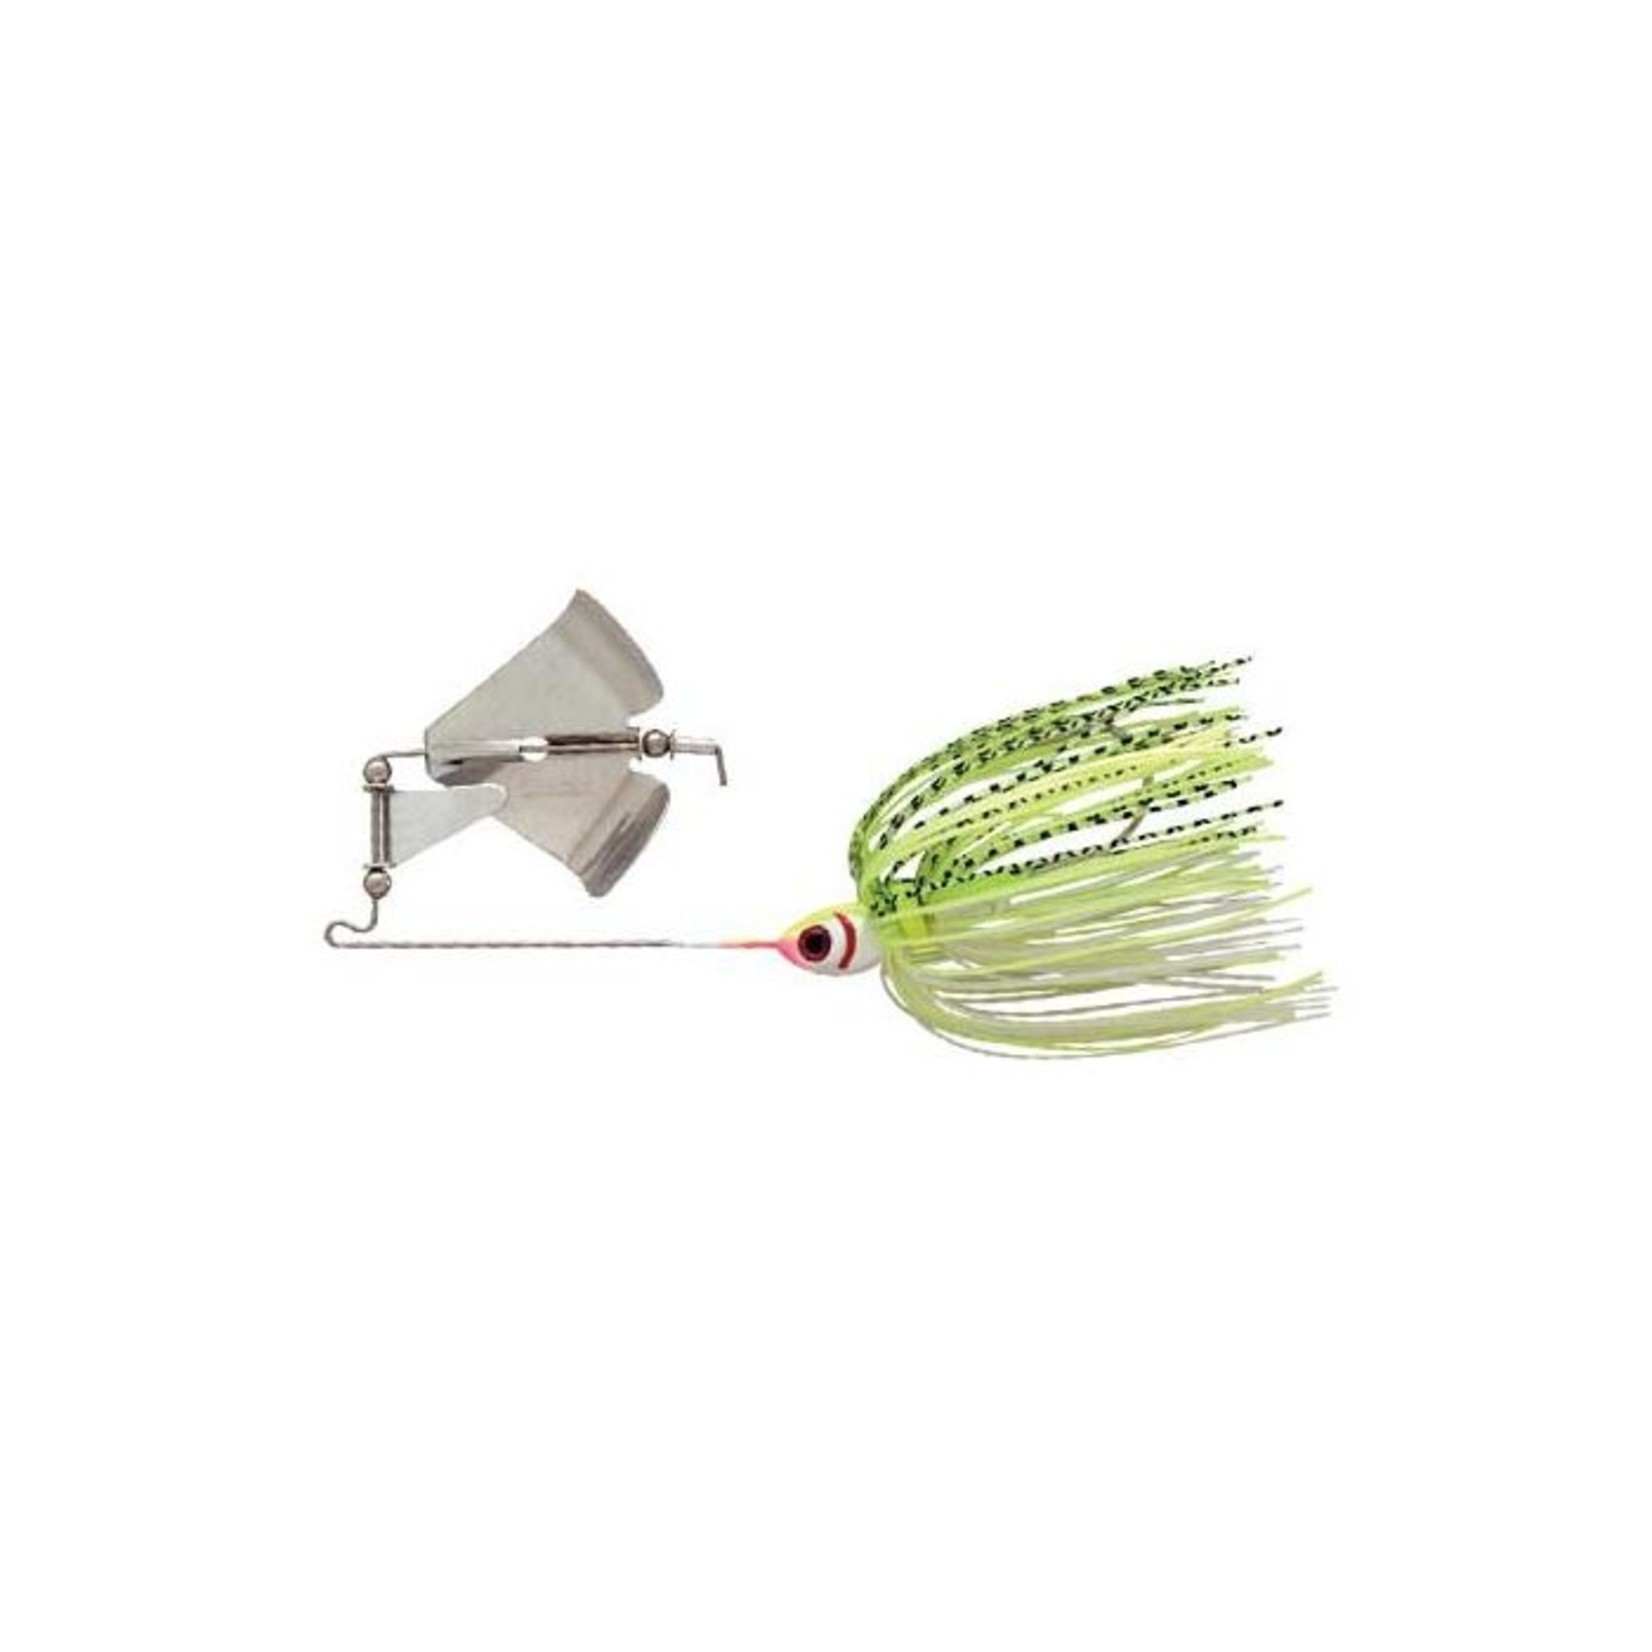 BOOYAH BUZZ 3/8 OZ WHITE CHARTREUSE SHAD